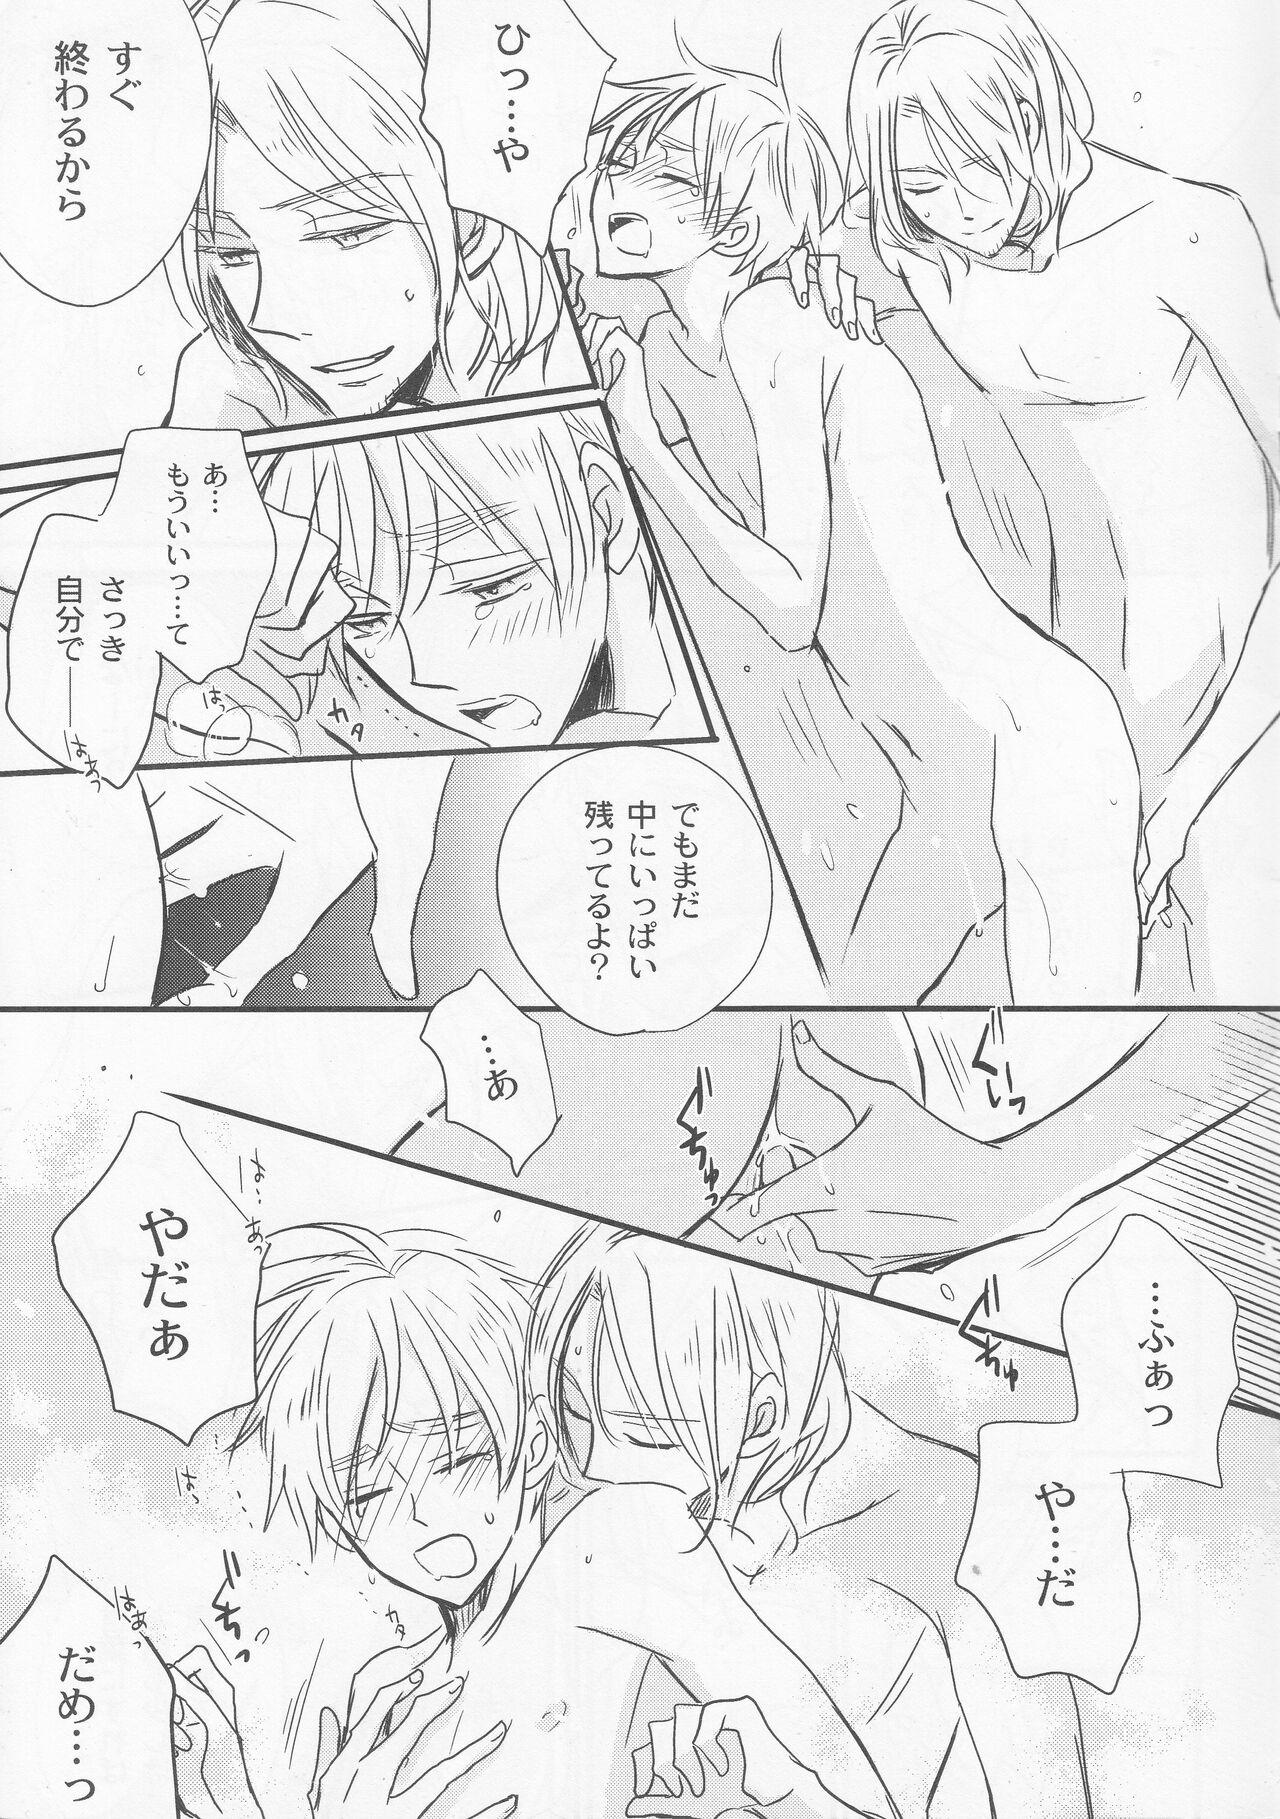 Gay unknown title - Axis powers hetalia Spanish - Page 12